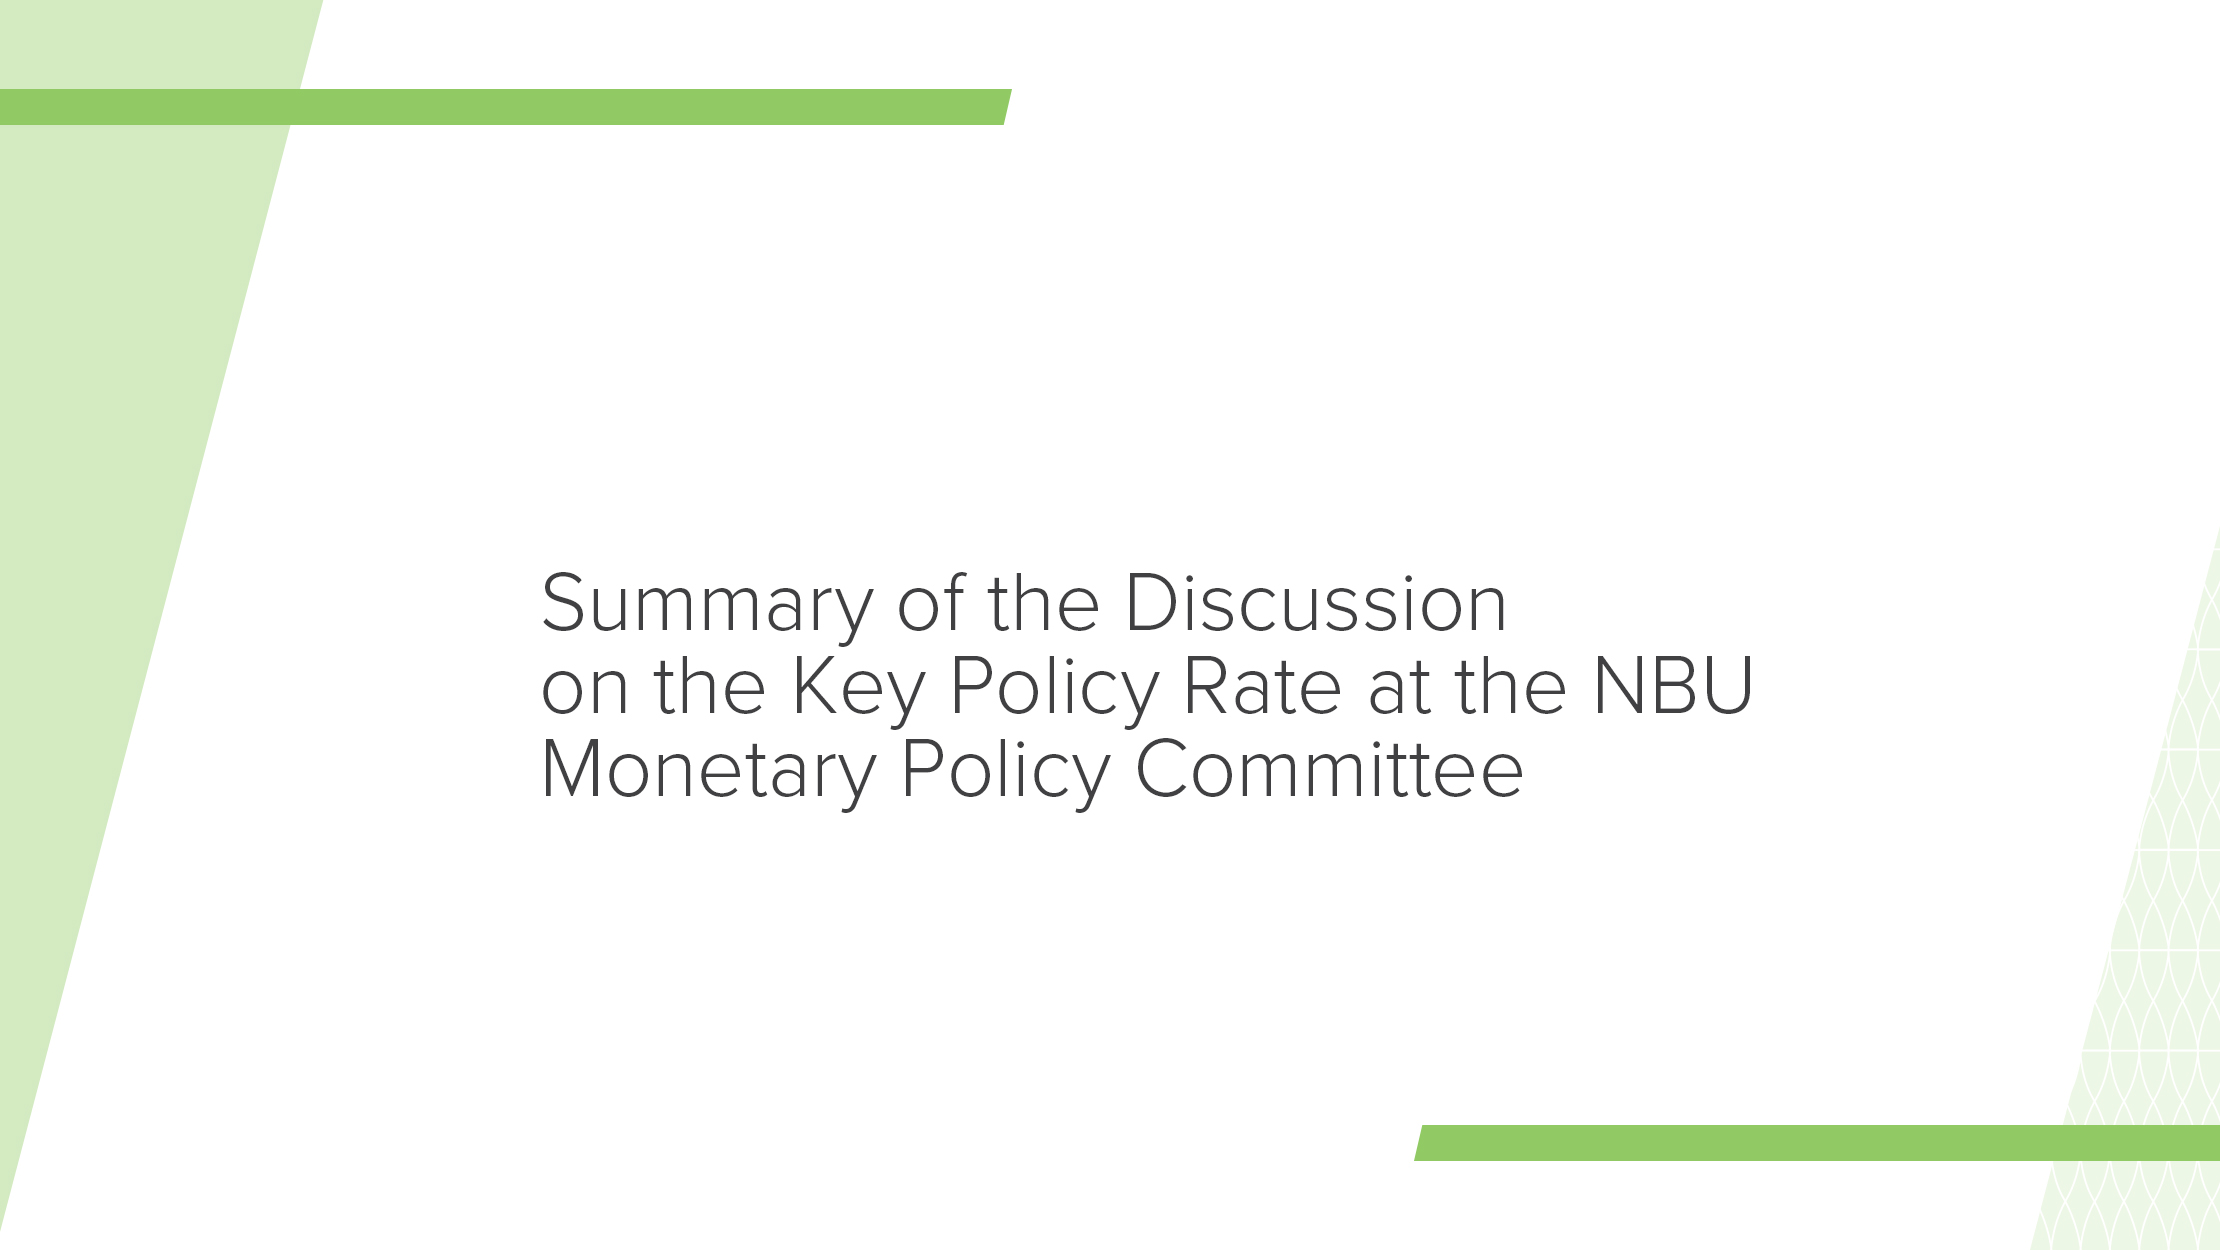 Summary of the Discussion on the Key Policy Rate at the recent meeting of the Monetary Policy Committee on 5 June 2019